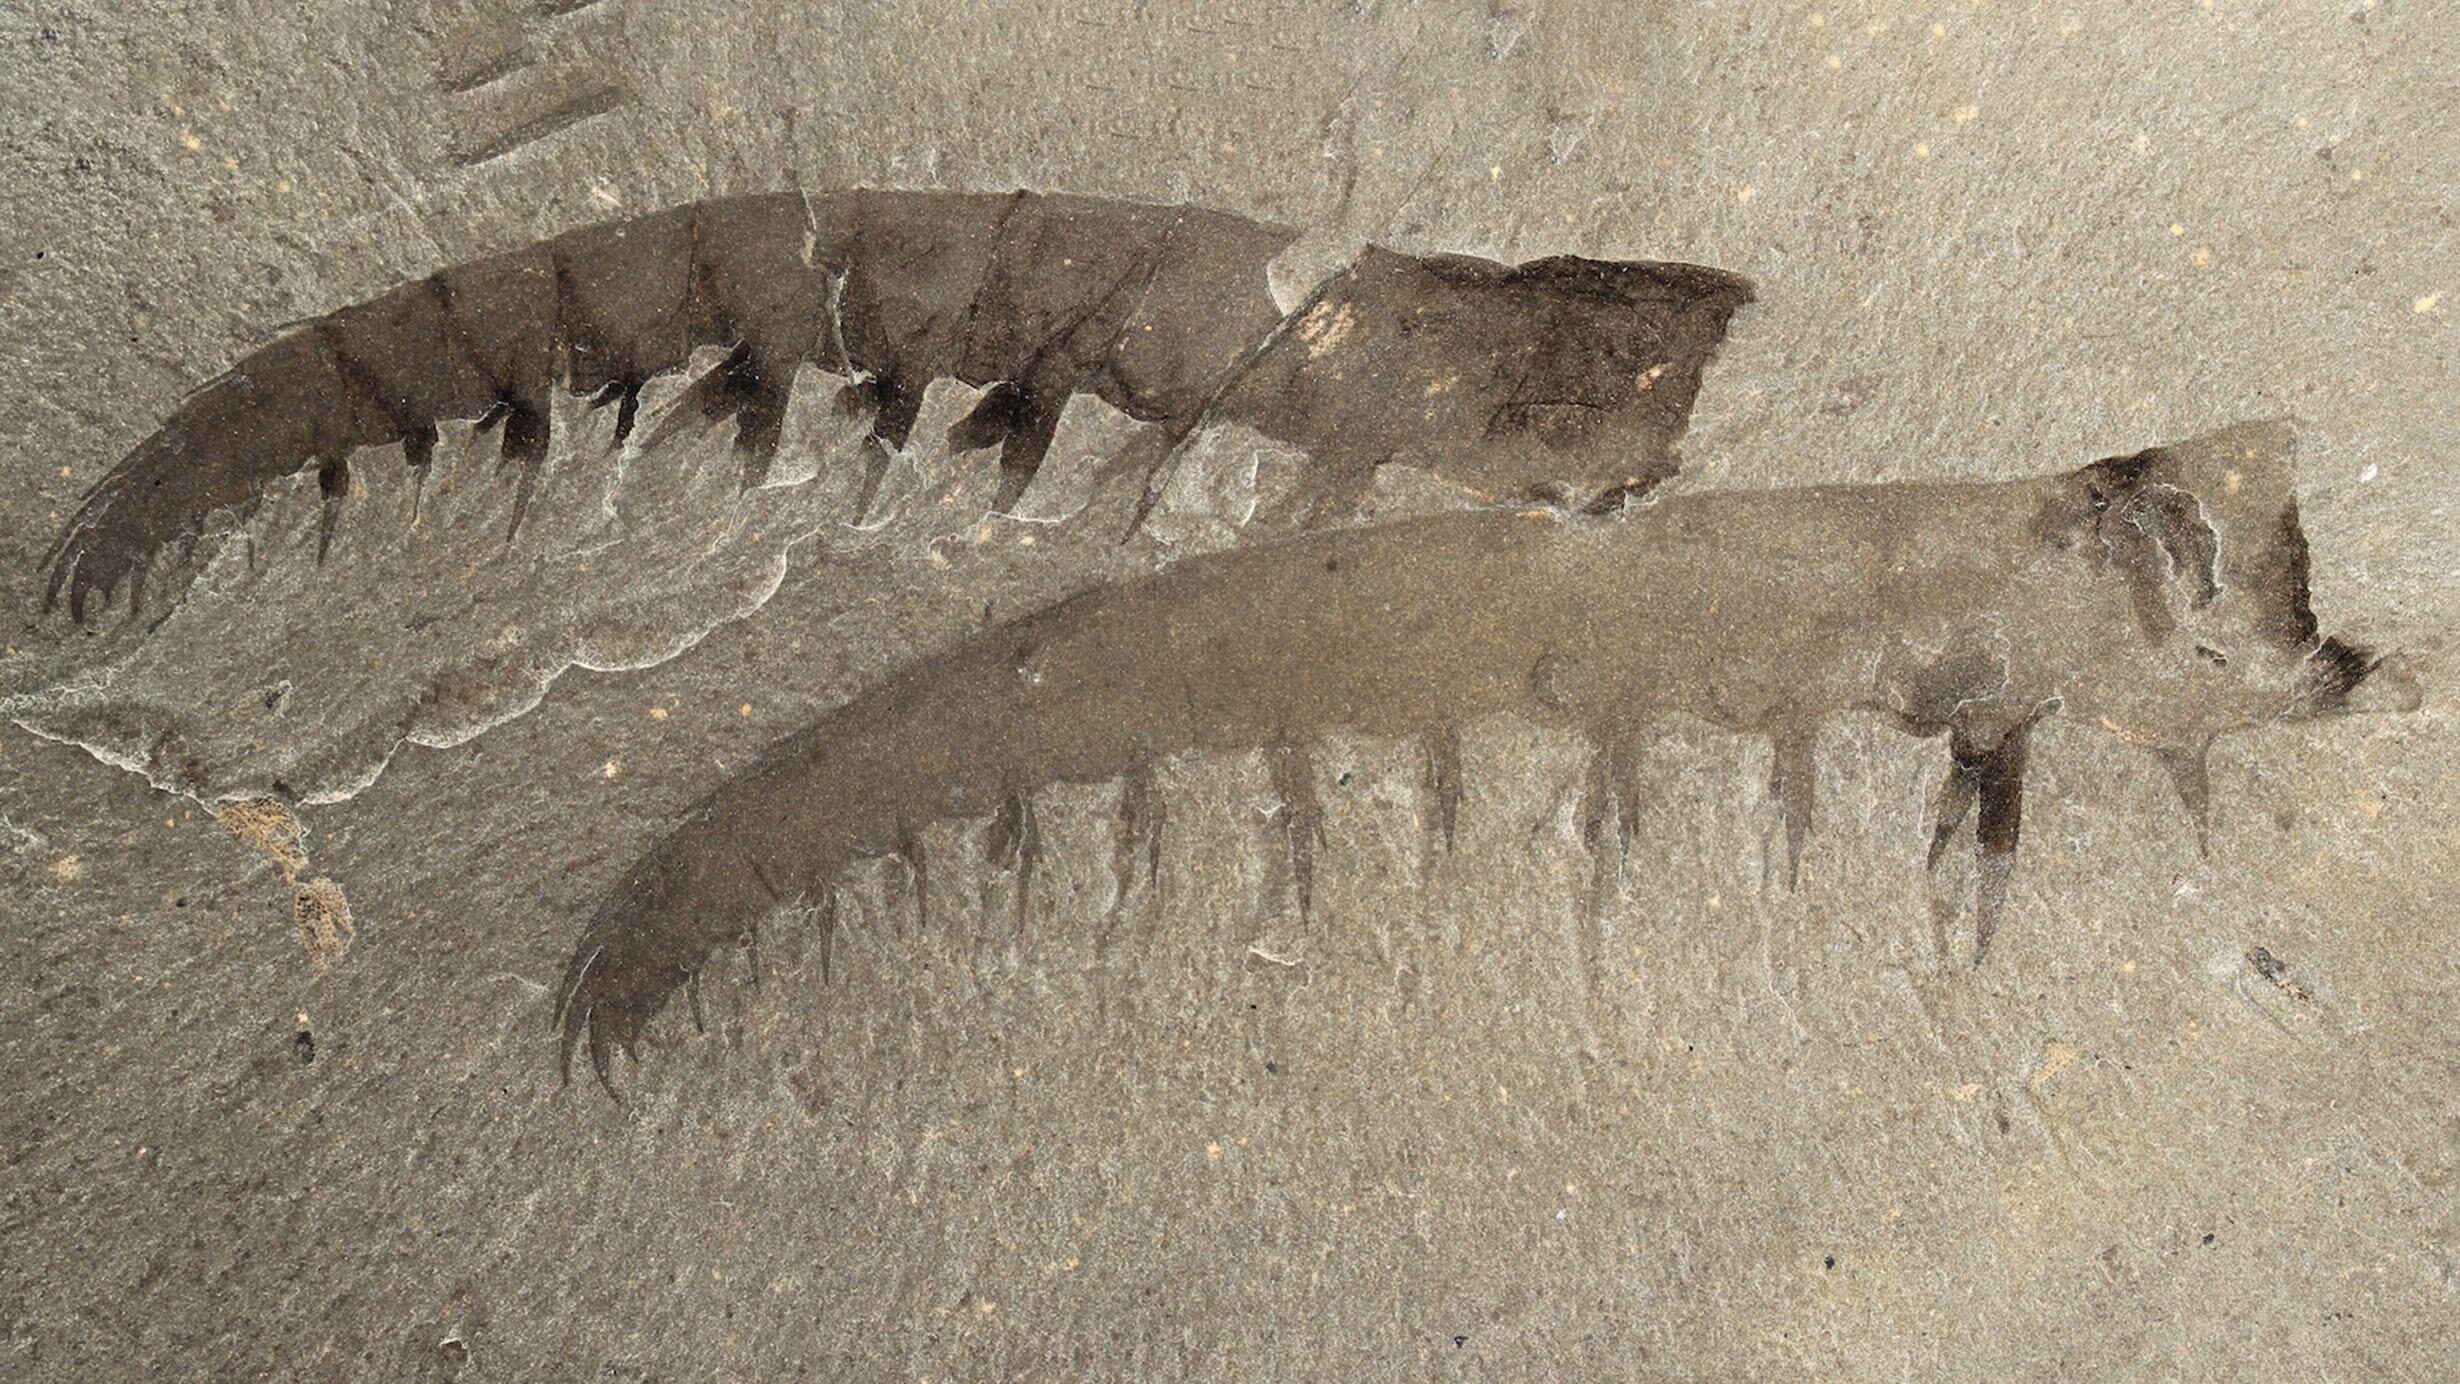 Two fossilized long appendages of the anomalocaris canadensis encased in stone.